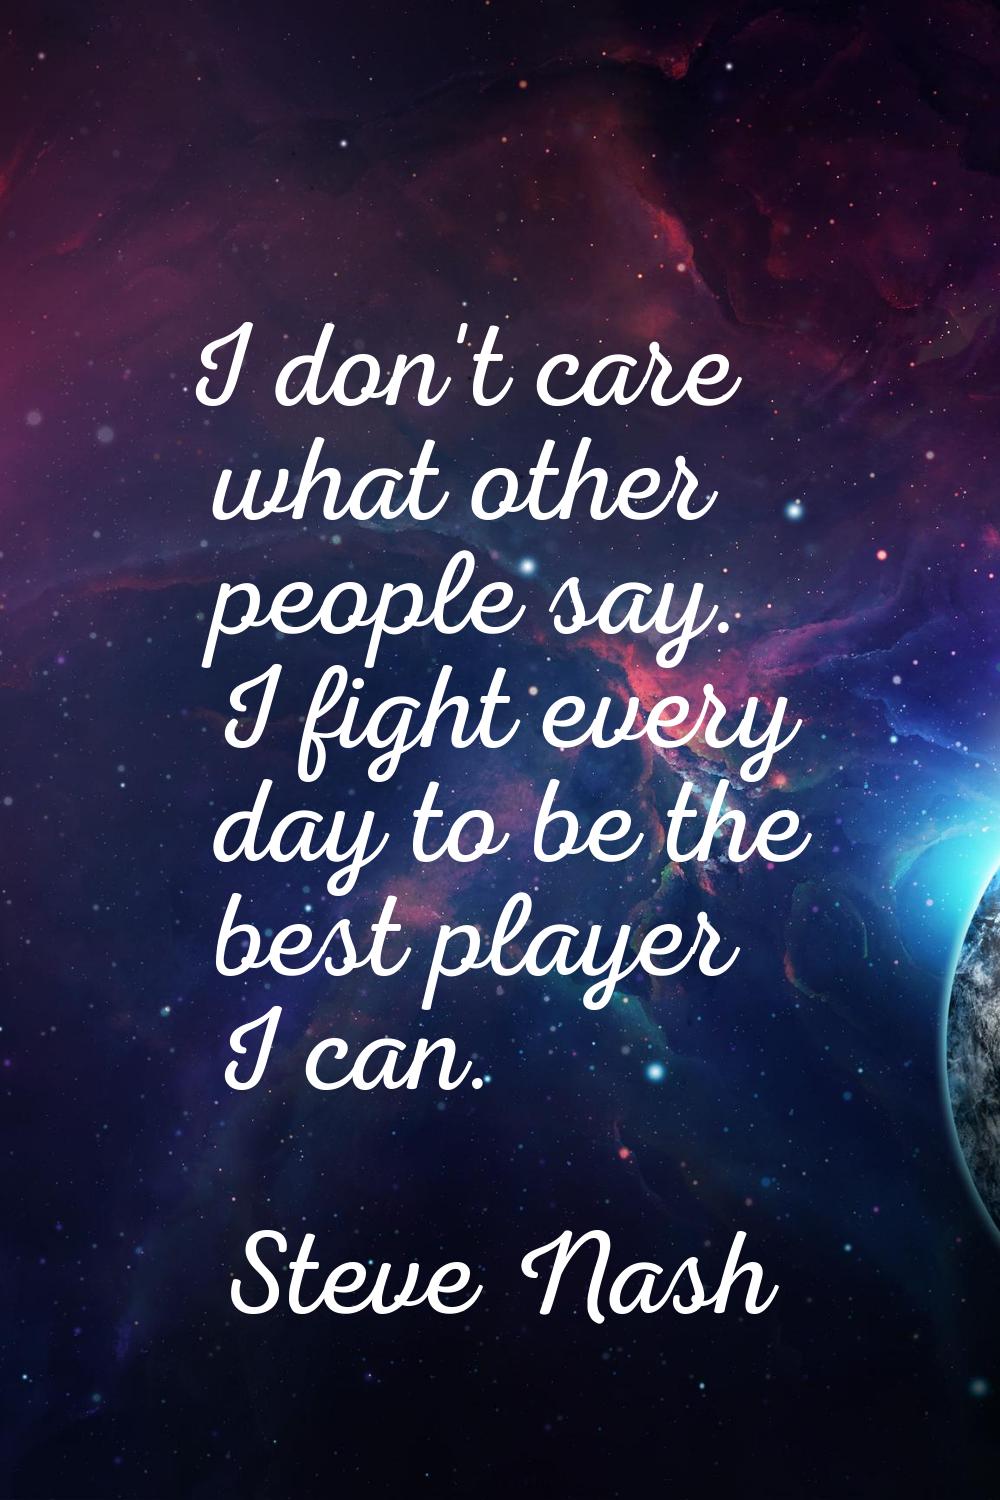 I don't care what other people say. I fight every day to be the best player I can.